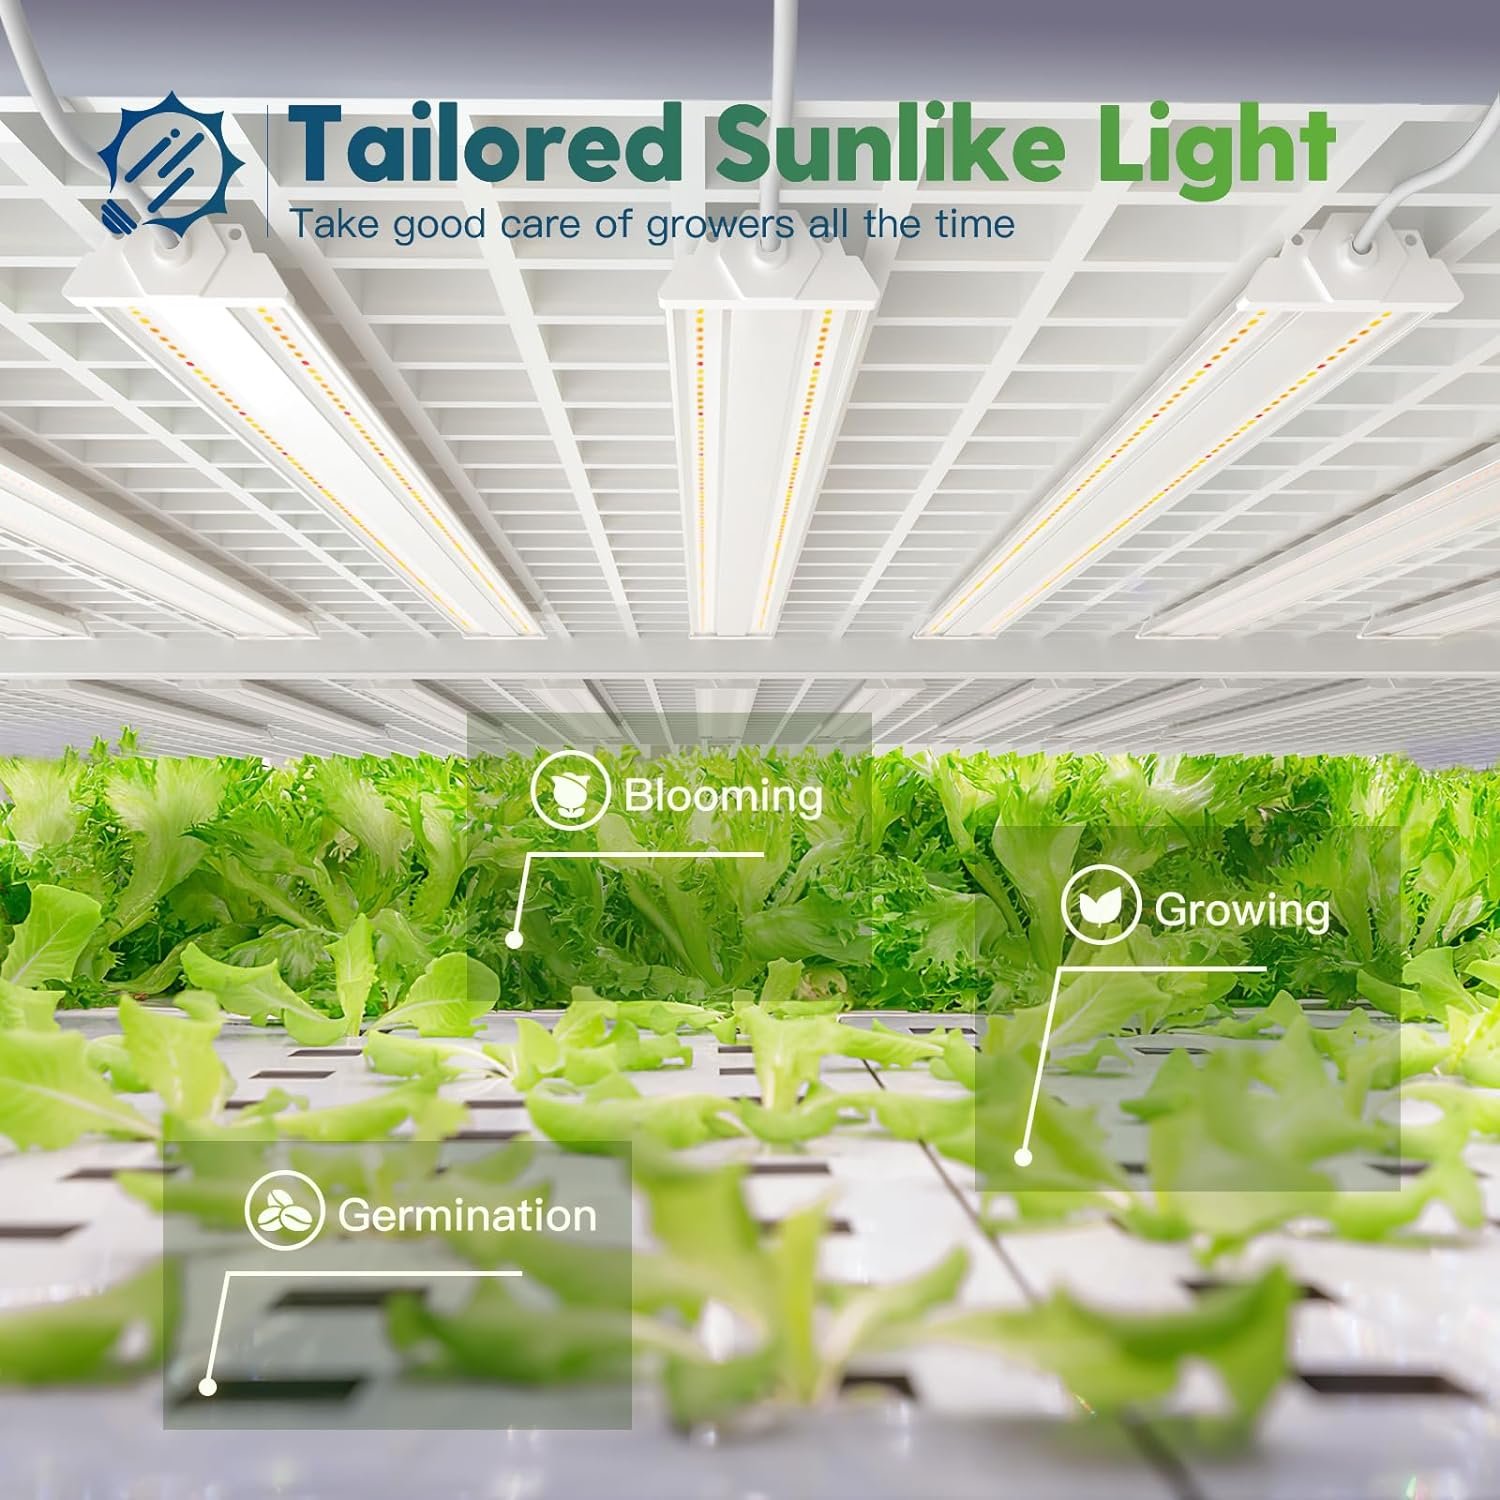 FREELICHT 4 Pack 4ft LED Grow Light, 60W (350W Equivalent), Sunlike Full Spectrum Integrated Plant Light for Hydroponic Indoor Plant Seedling Veg and Flower, Plug in with On/Off Switch